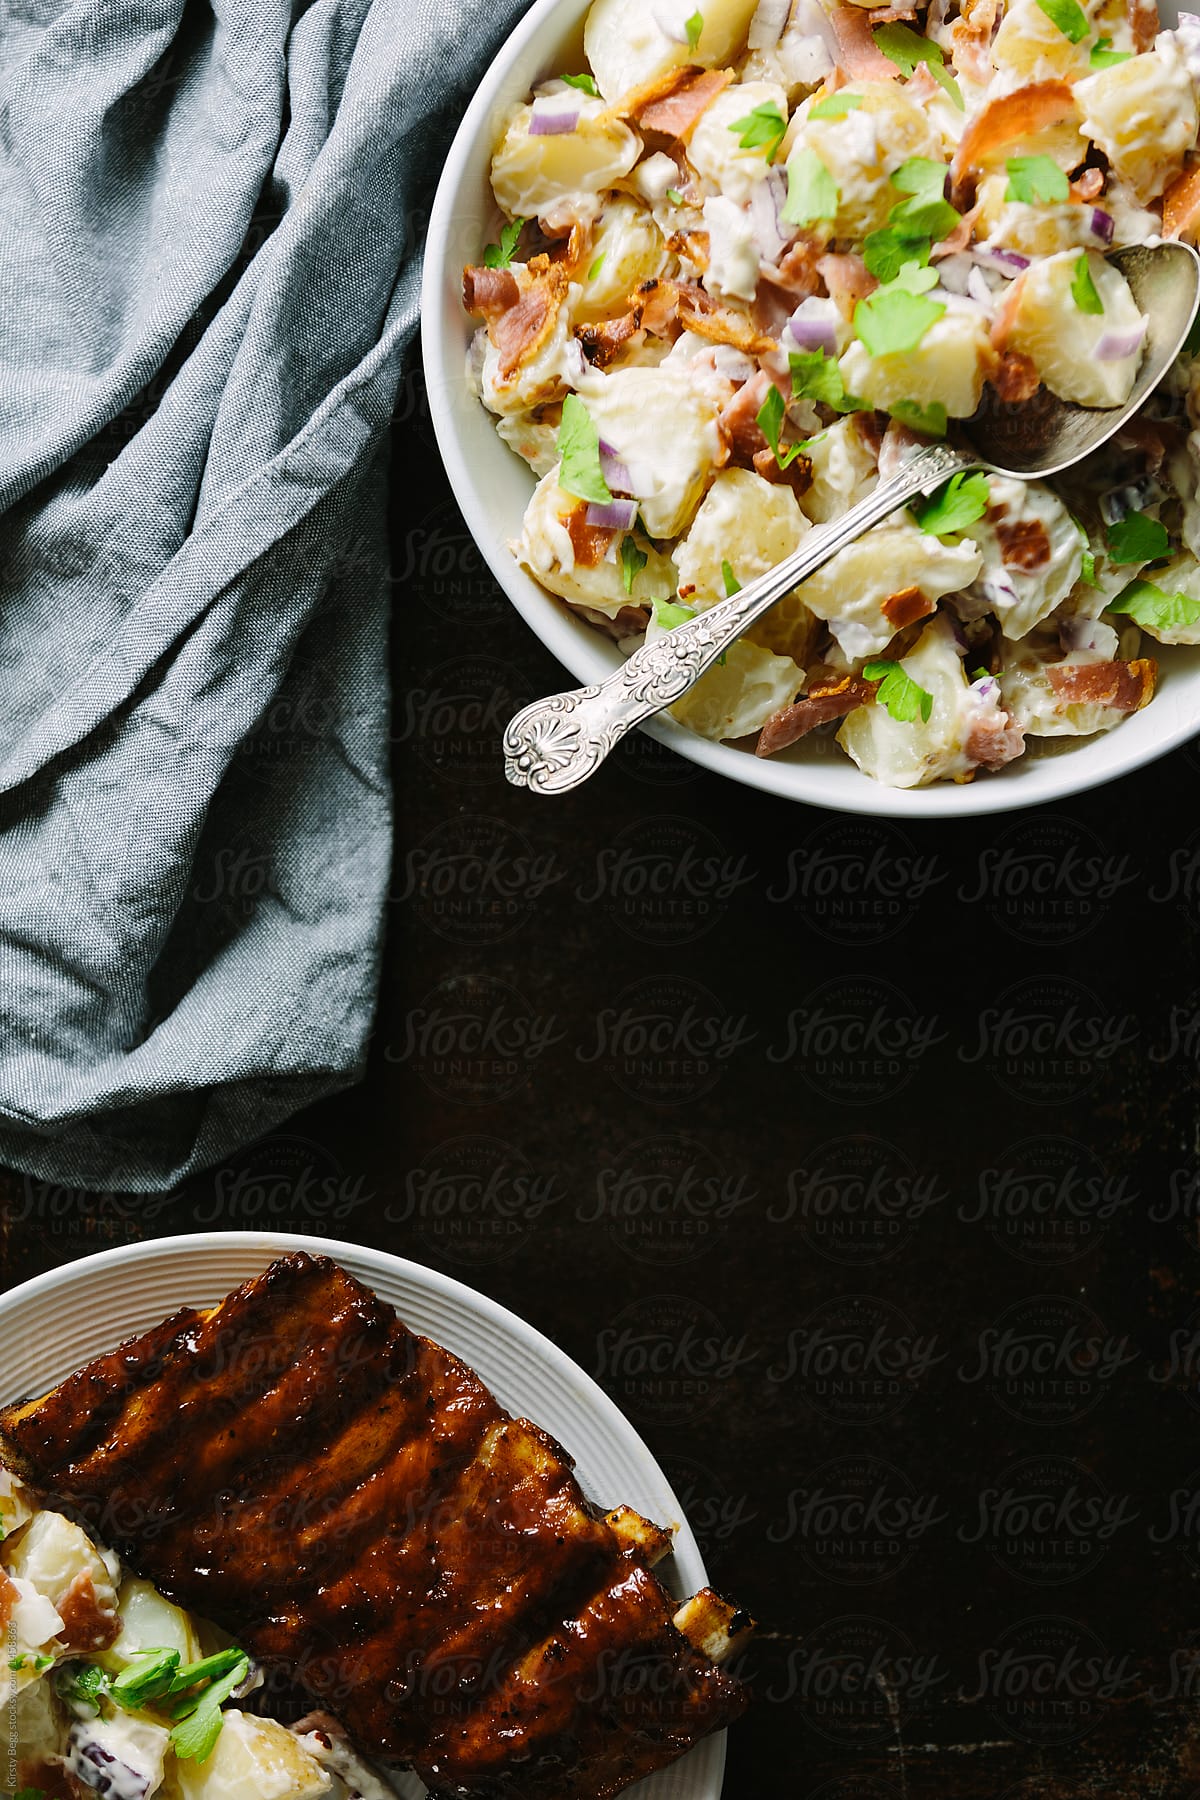 Bowl of potato salad with plate of bbq ribs